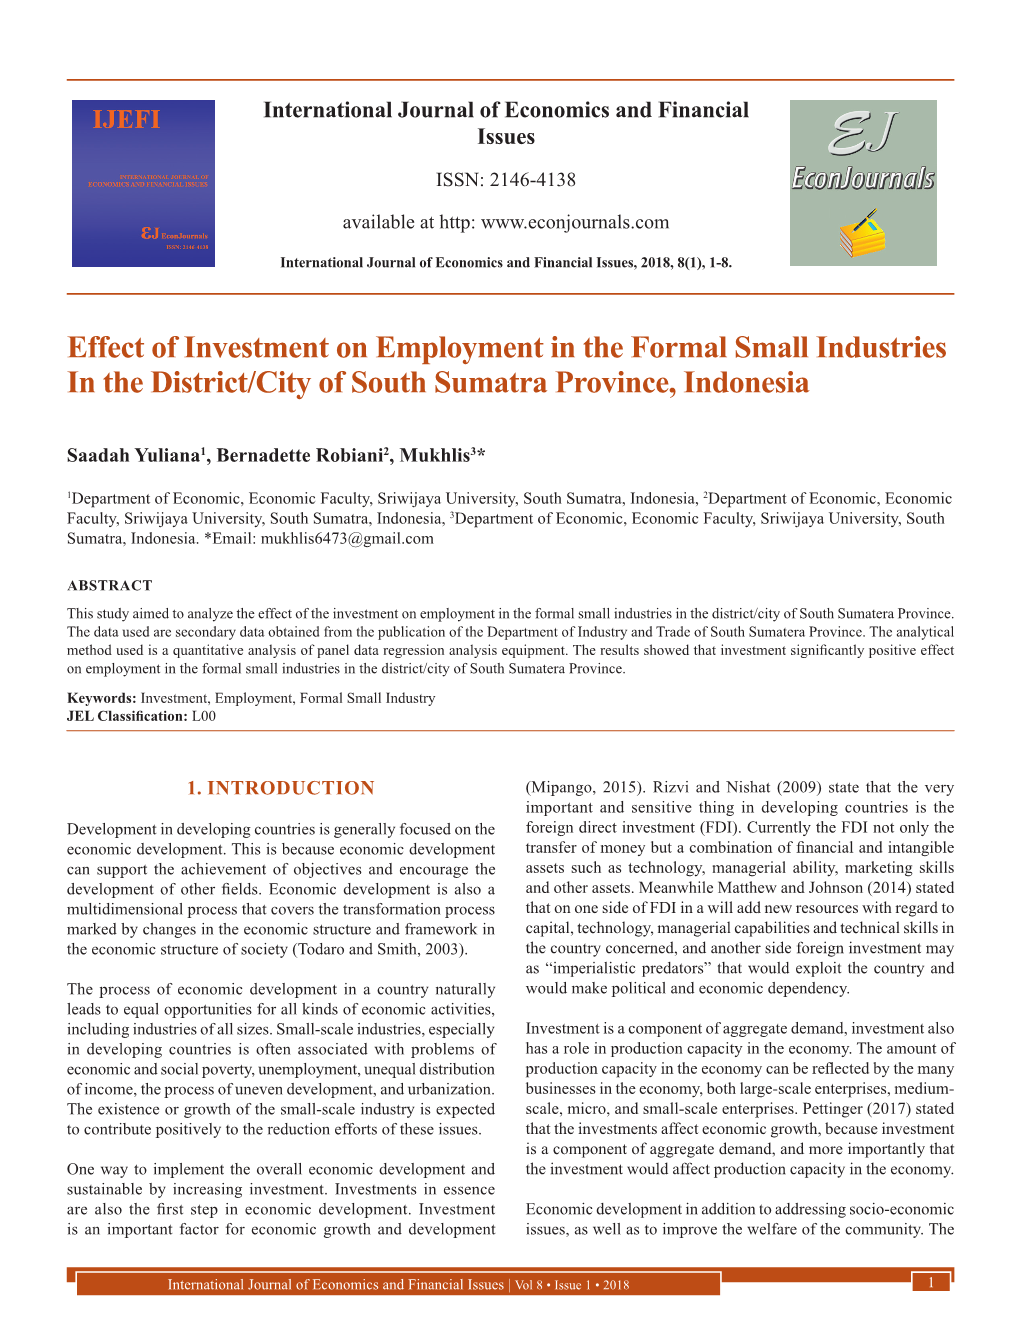 Effect of Investment on Employment in the Formal Small Industries in the District/City of South Sumatra Province, Indonesia